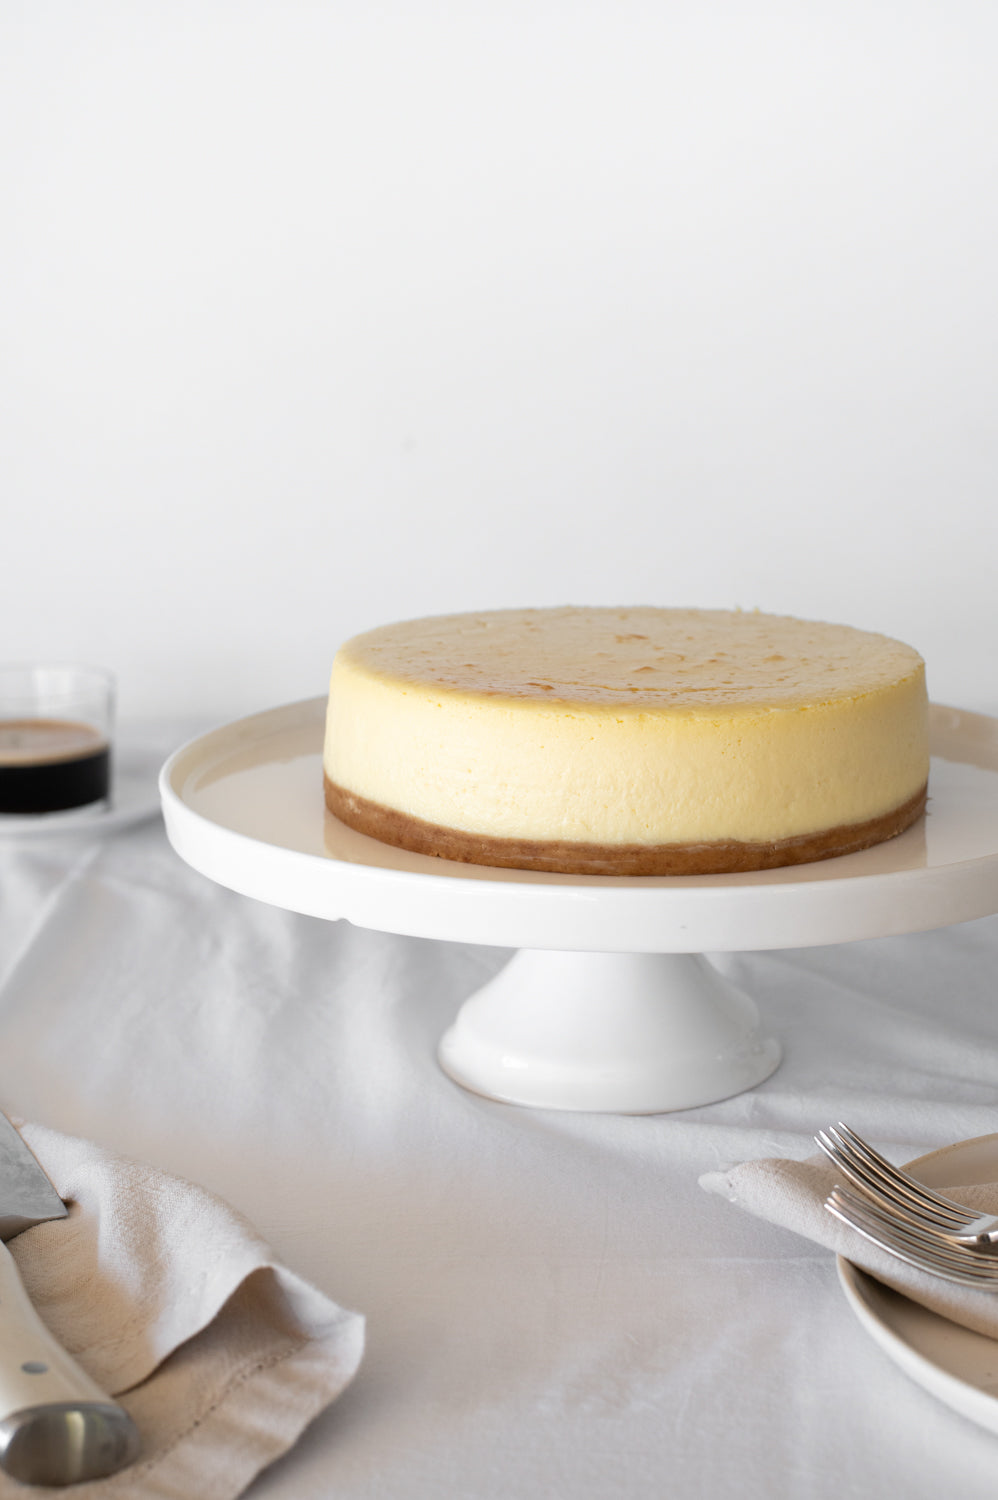 Plain Baked Cheesecake on a cake stand